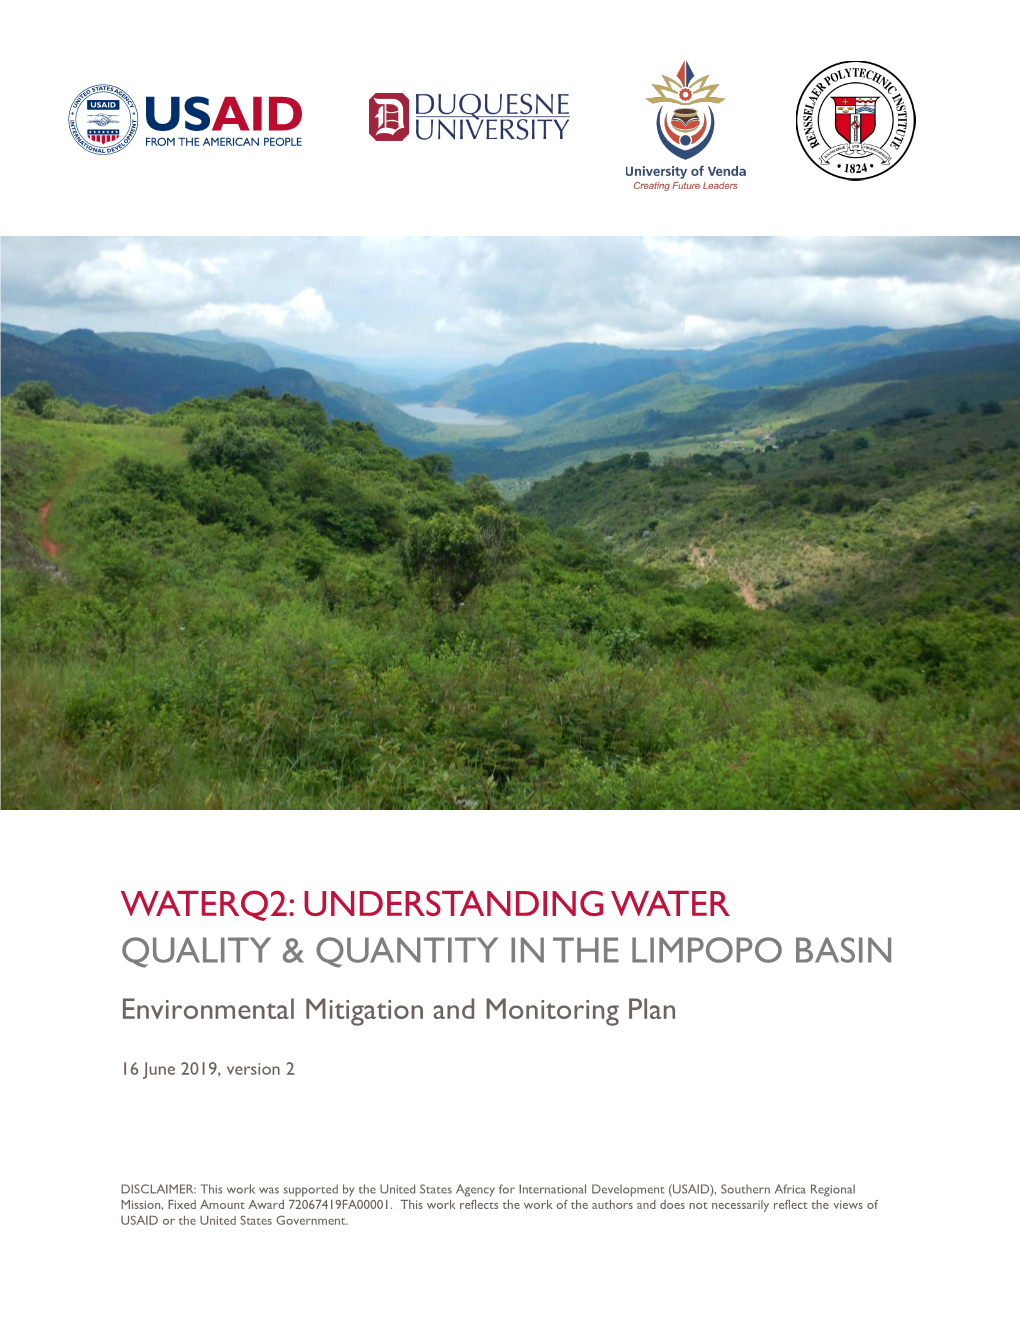 WATERQ2: UNDERSTANDING WATER QUALITY & QUANTITY in the LIMPOPO BASIN Environmental Mitigation and Monitoring Plan